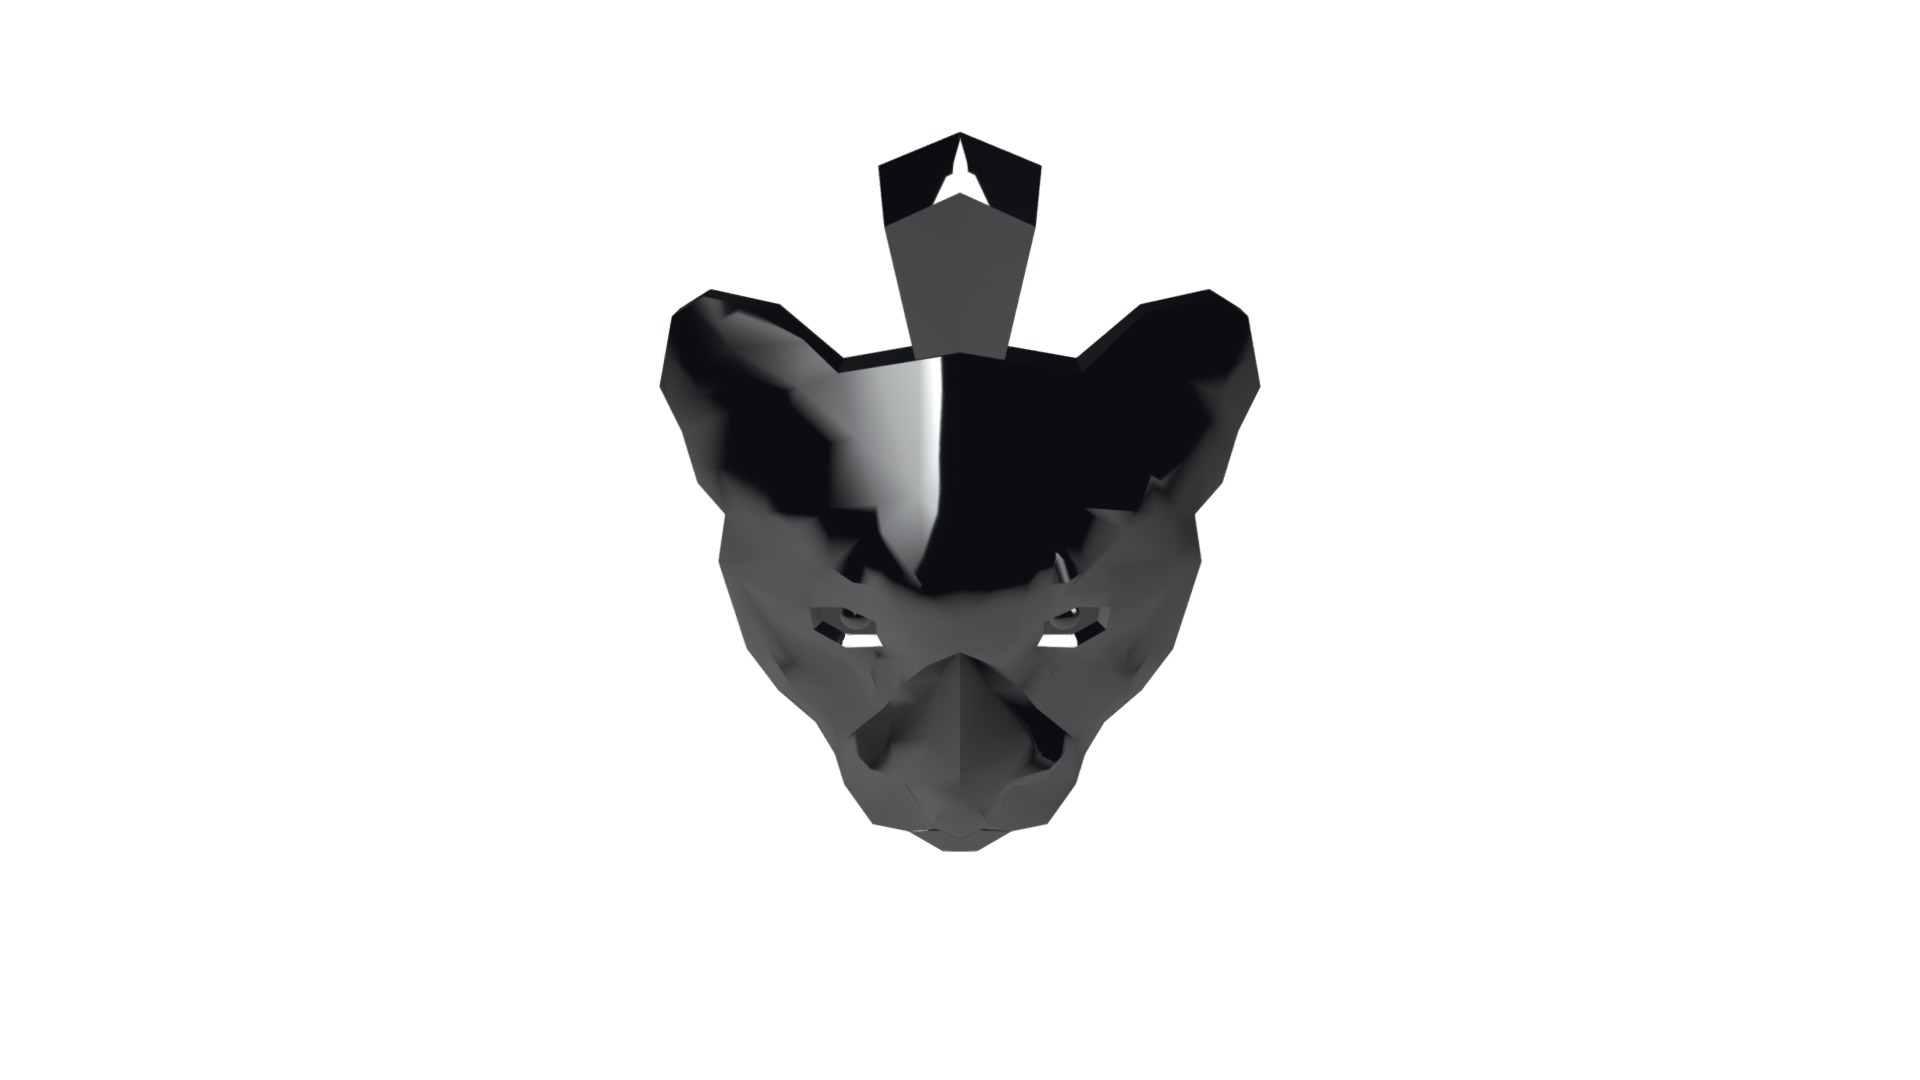 3D model Geometric Puma - This is a 3D model of the Geometric Puma. The 3D model is about a hand with a black and white cube on it.